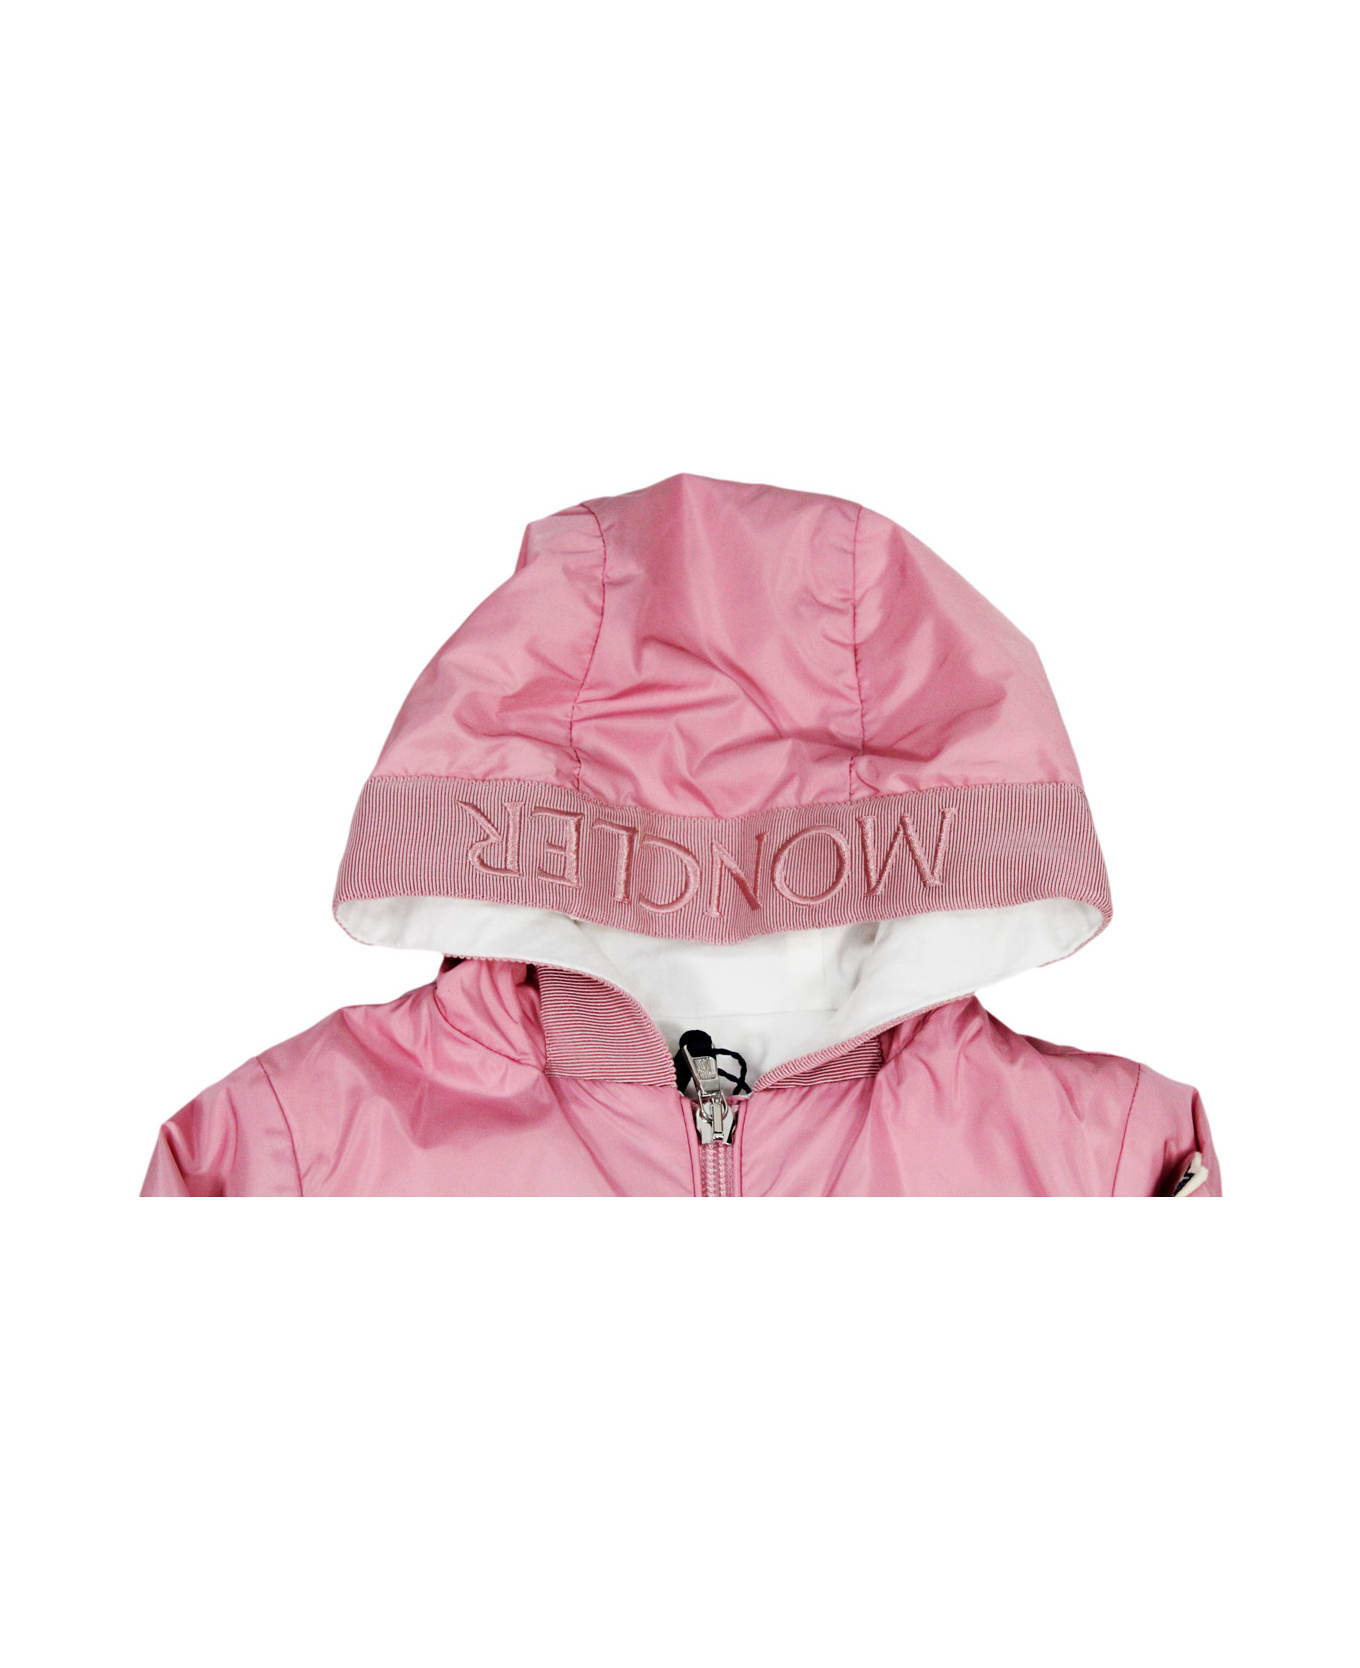 Moncler Light Nylon Messein Jacket With Hood And Zip Closure With Logo Printed On The Arm. - Pink